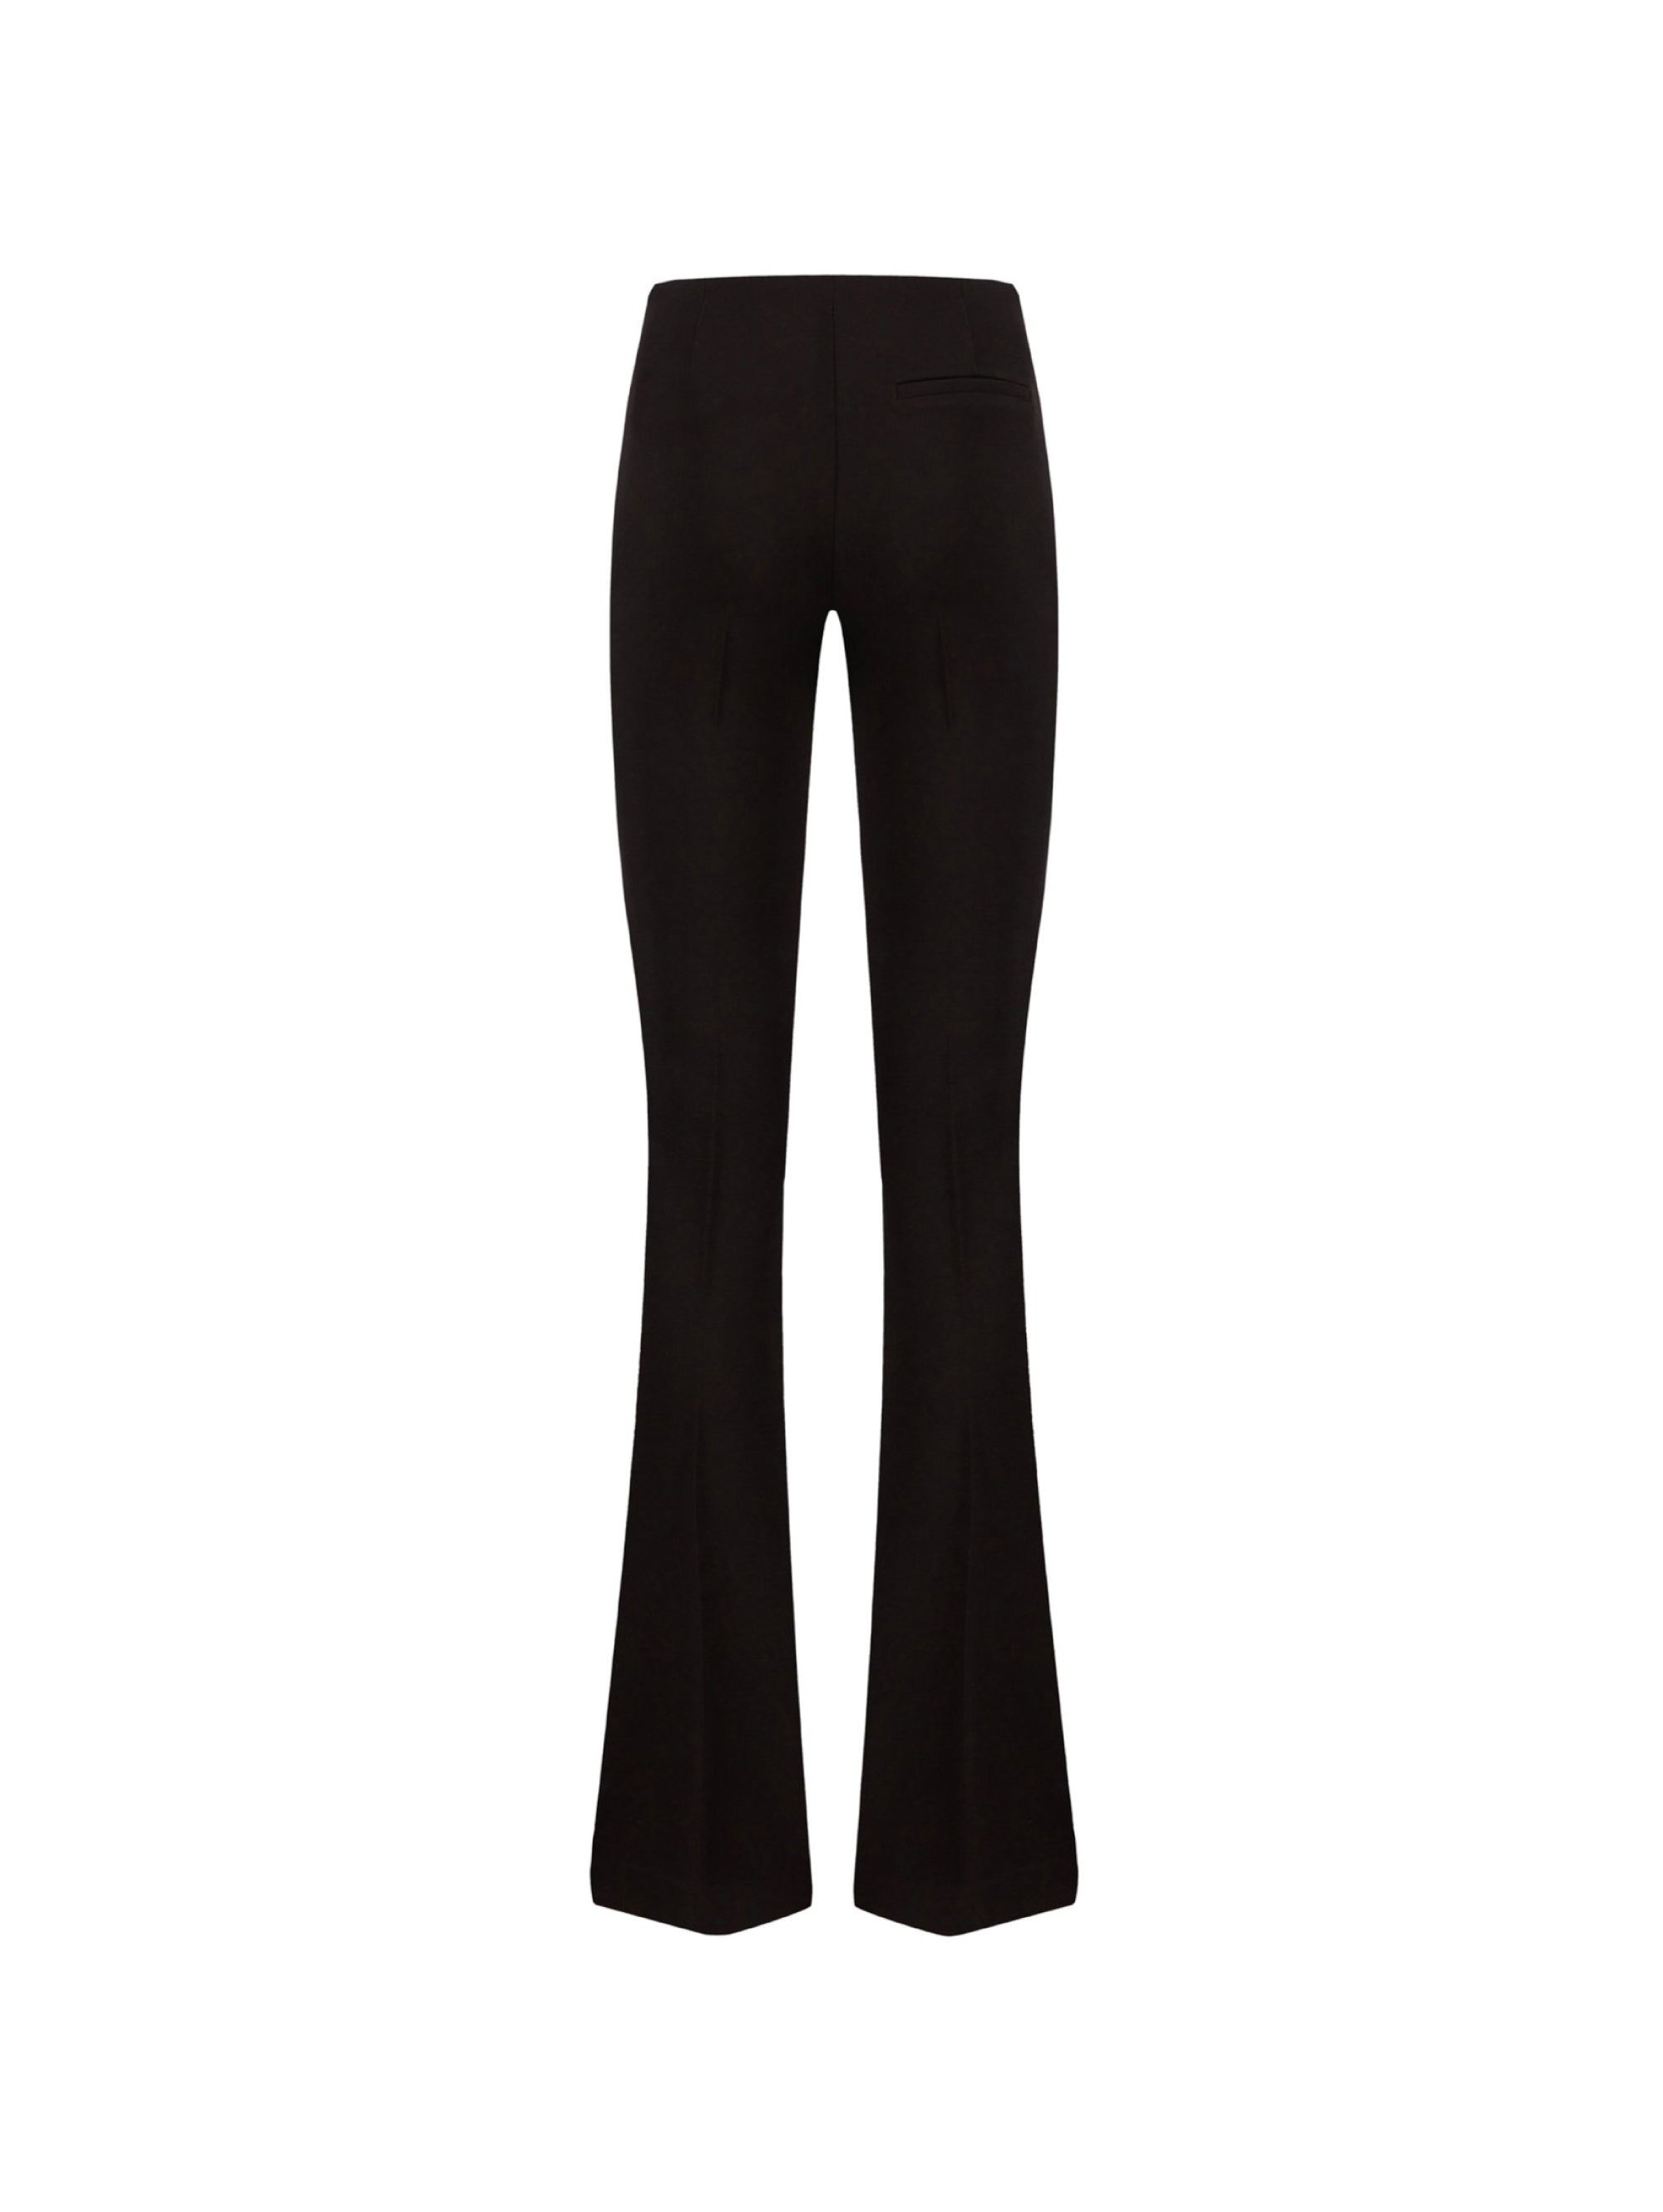 Flared Trousers in Black Crepe Stitch Fabric